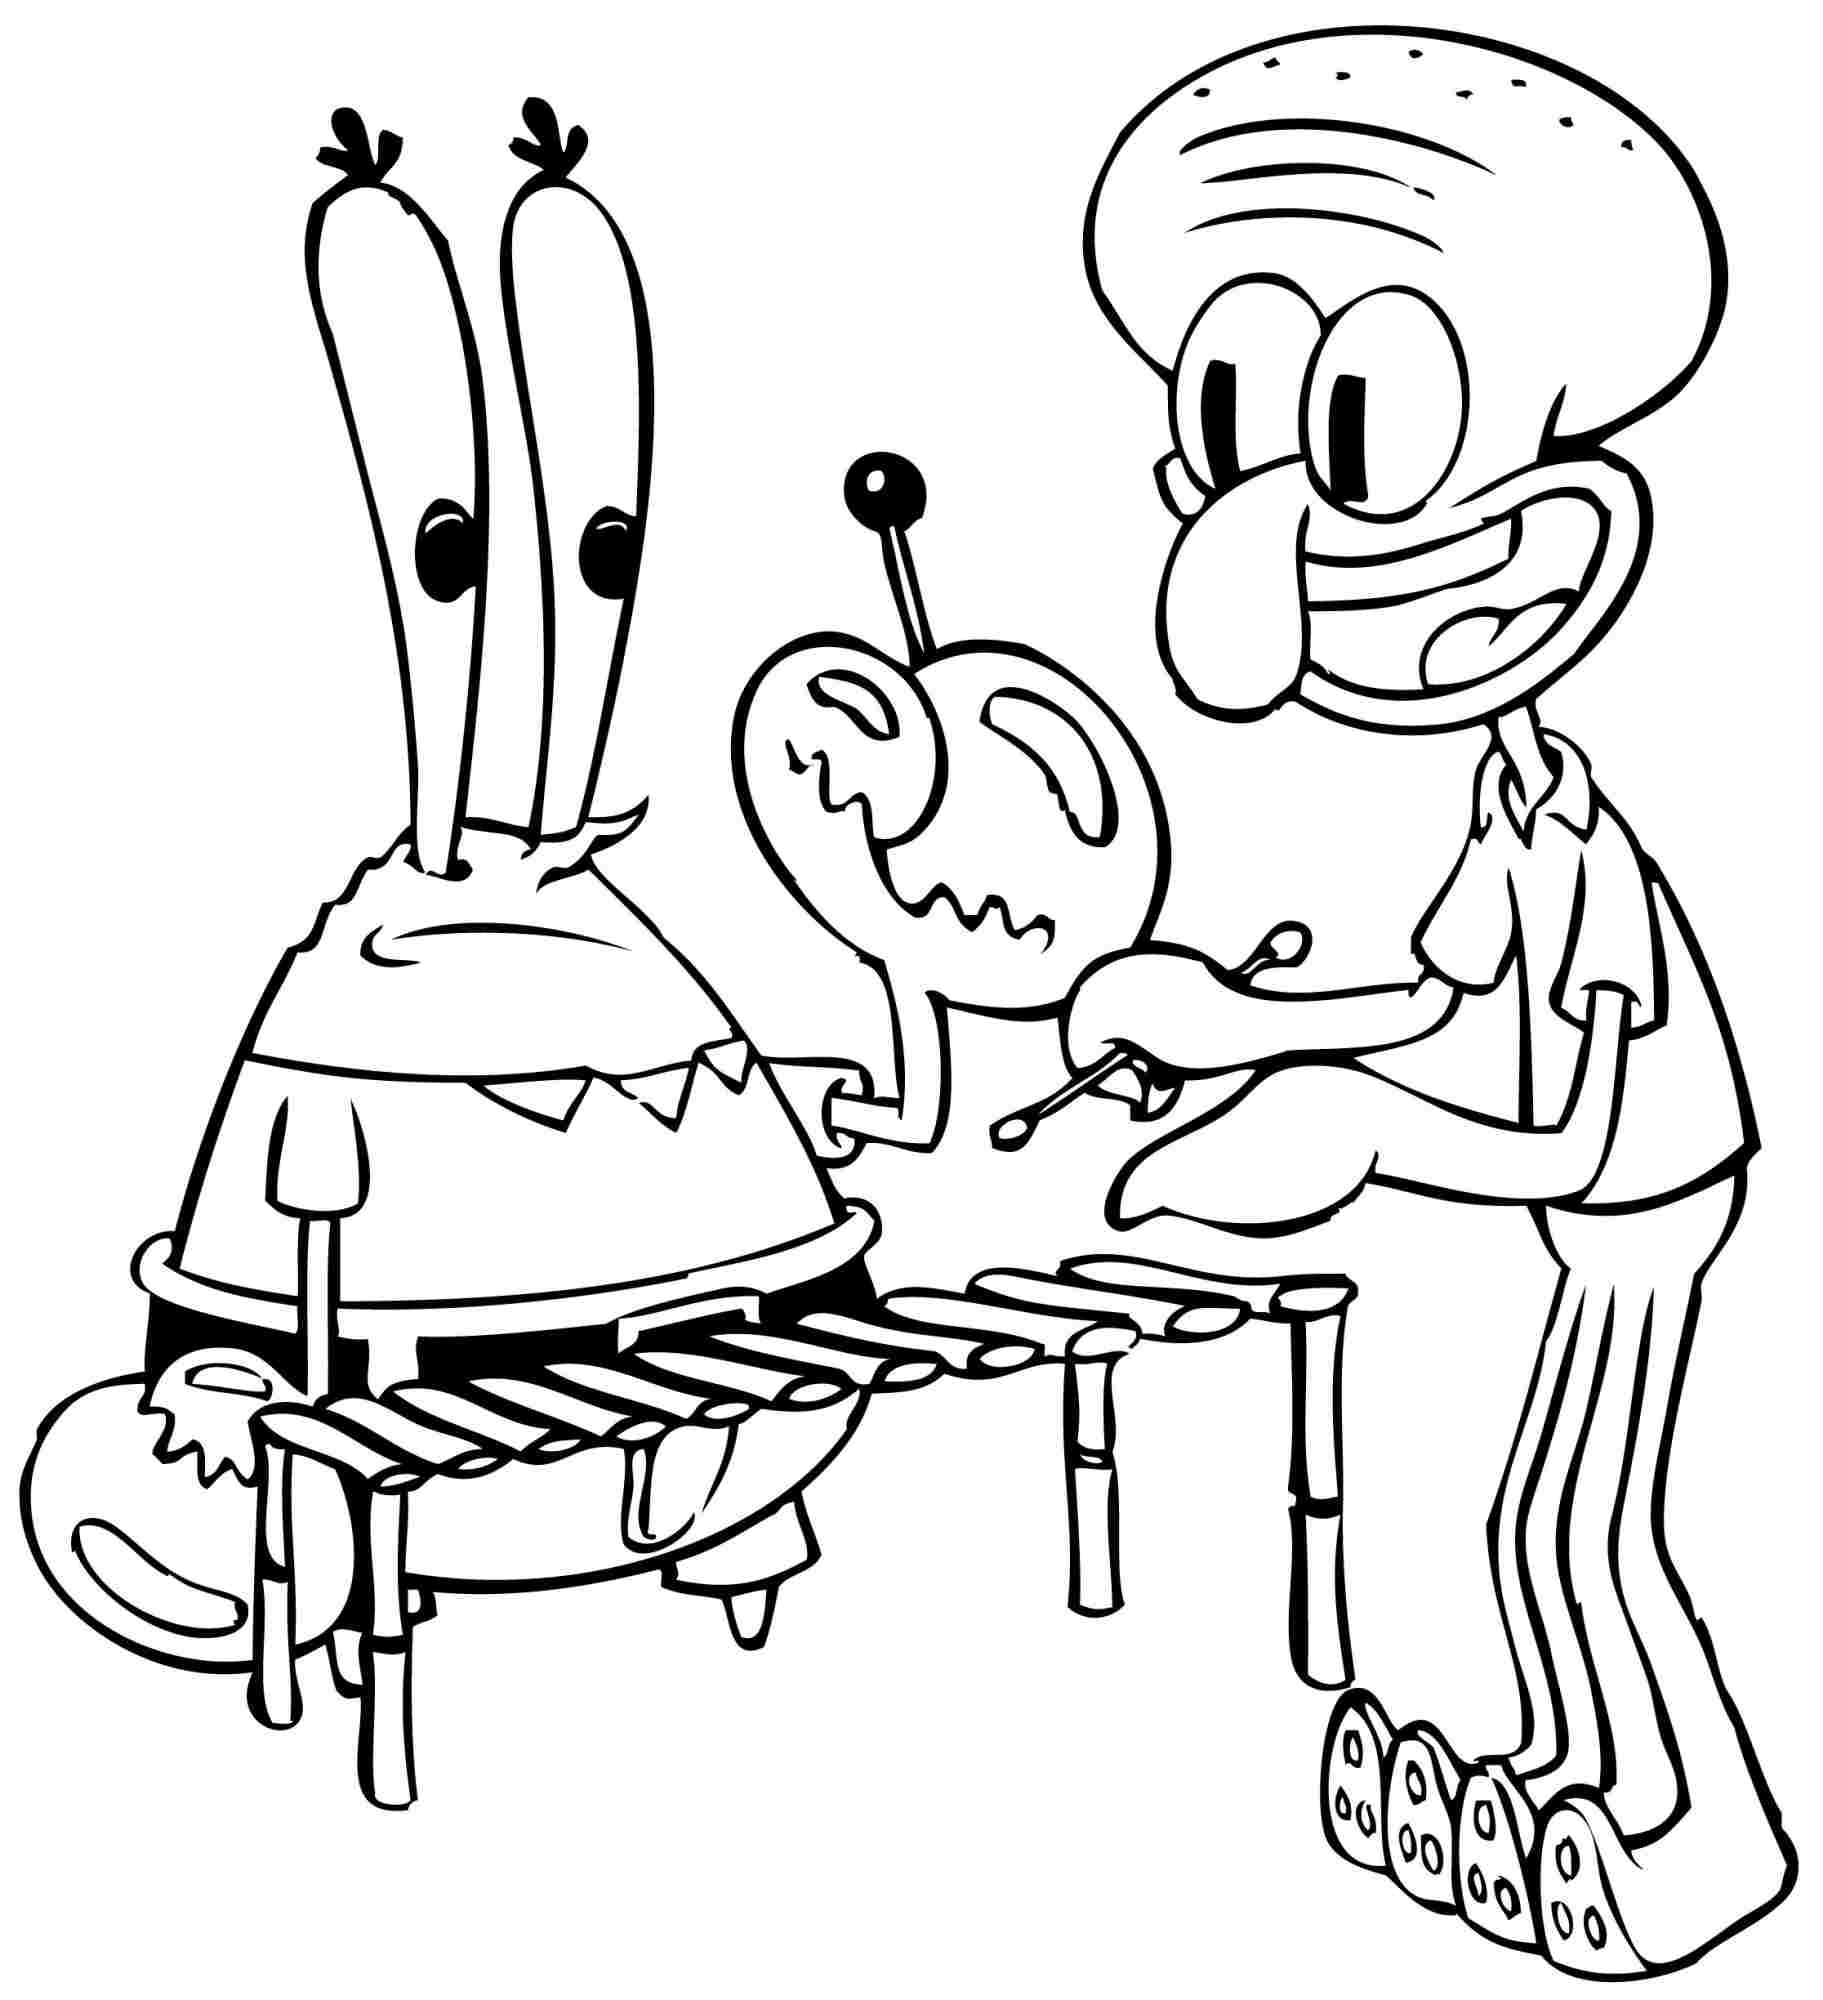 Spongebob Coloring Pages at GetColorings.com | Free ...